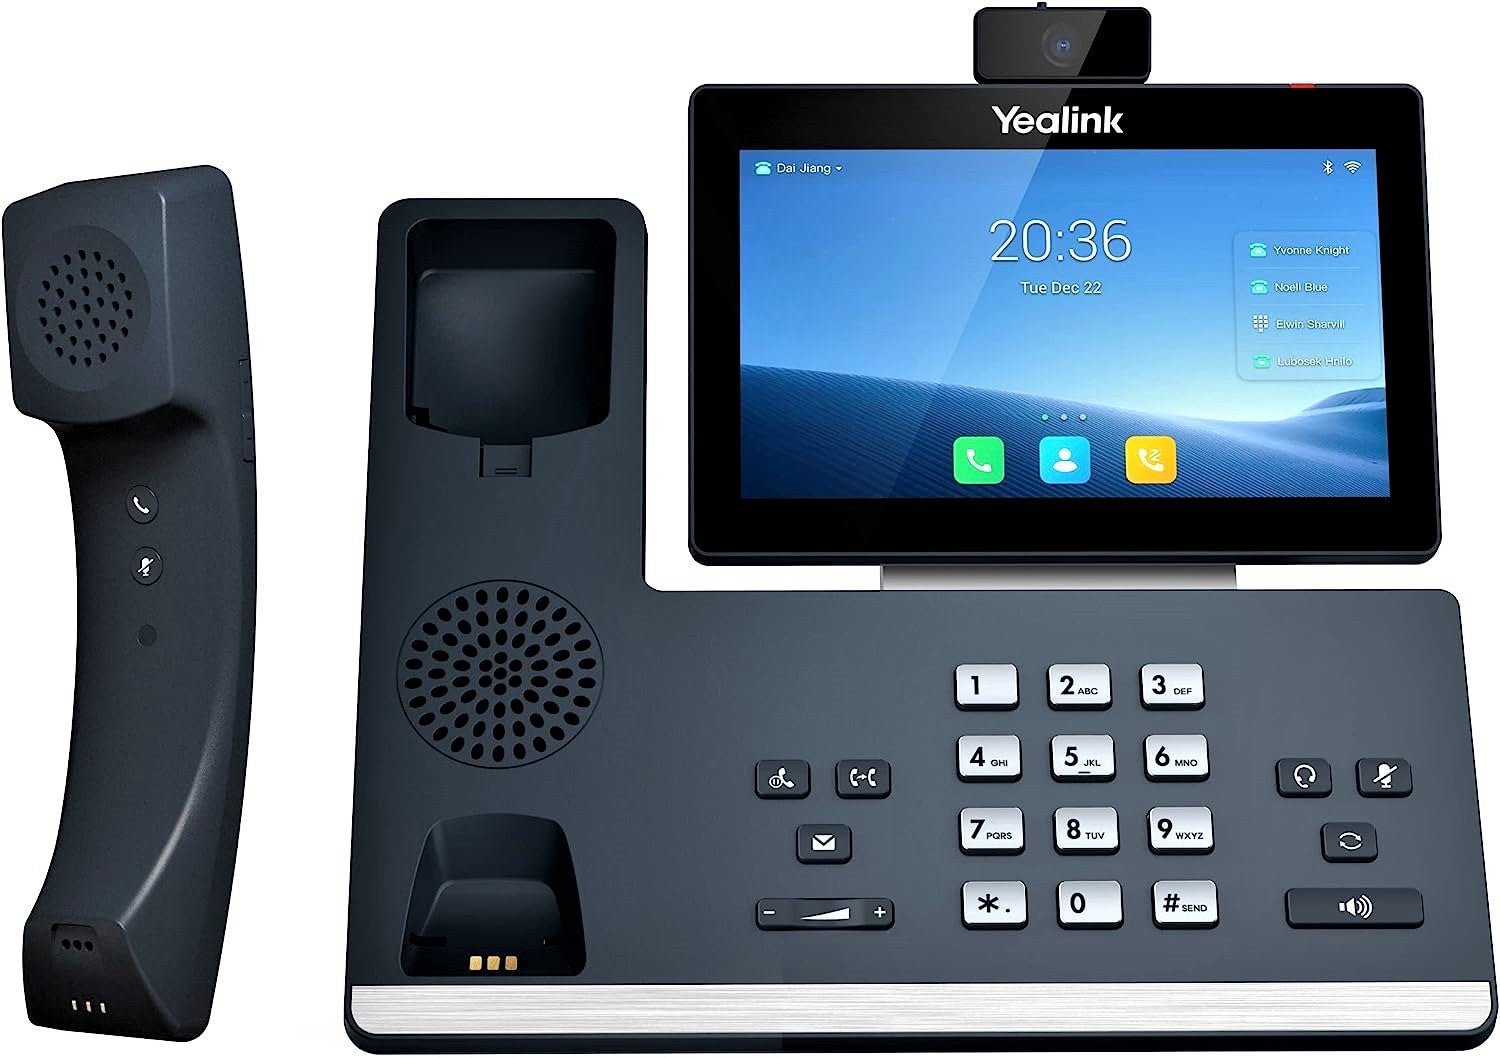 Yealink IP Phone SIP-T58W Pro with Camera